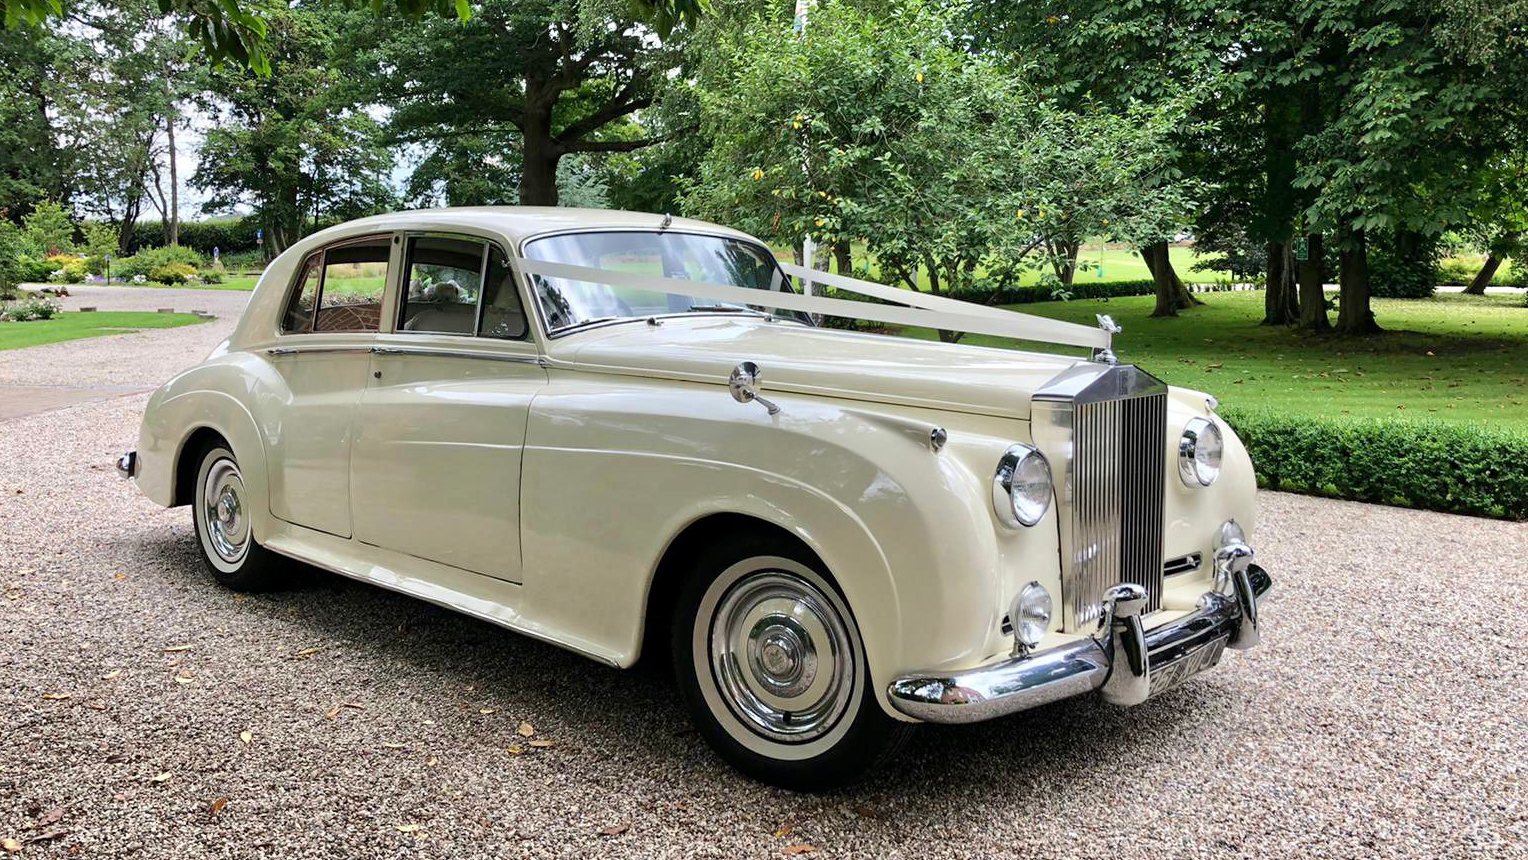 Classic Rolls-Royce Silver Cloud decorated with Ivory Ribbons at a local Watford park with green trees in the background